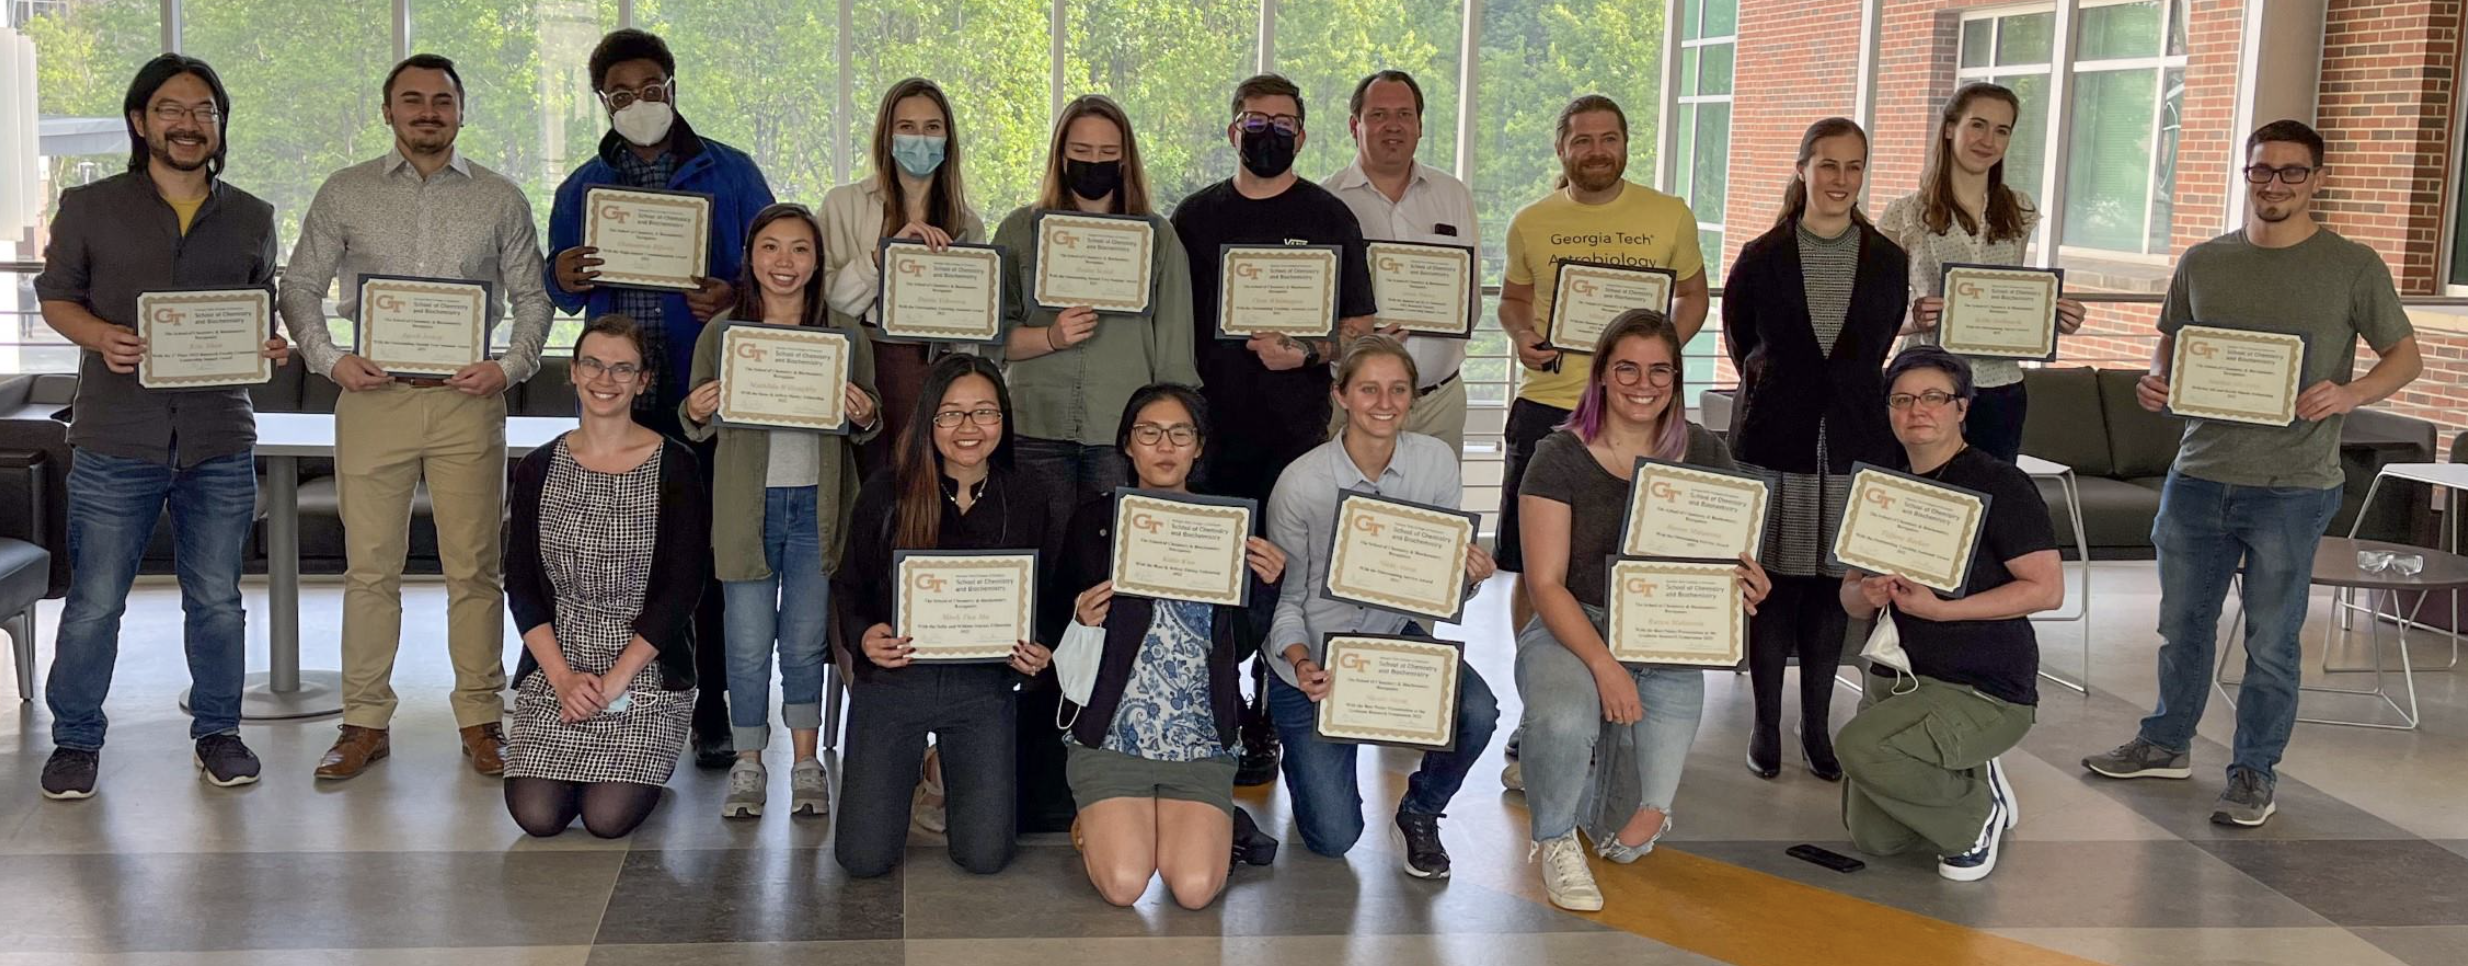 Award winners from the 2022 spring symposium in the School of Chemistry and Biochemistry.